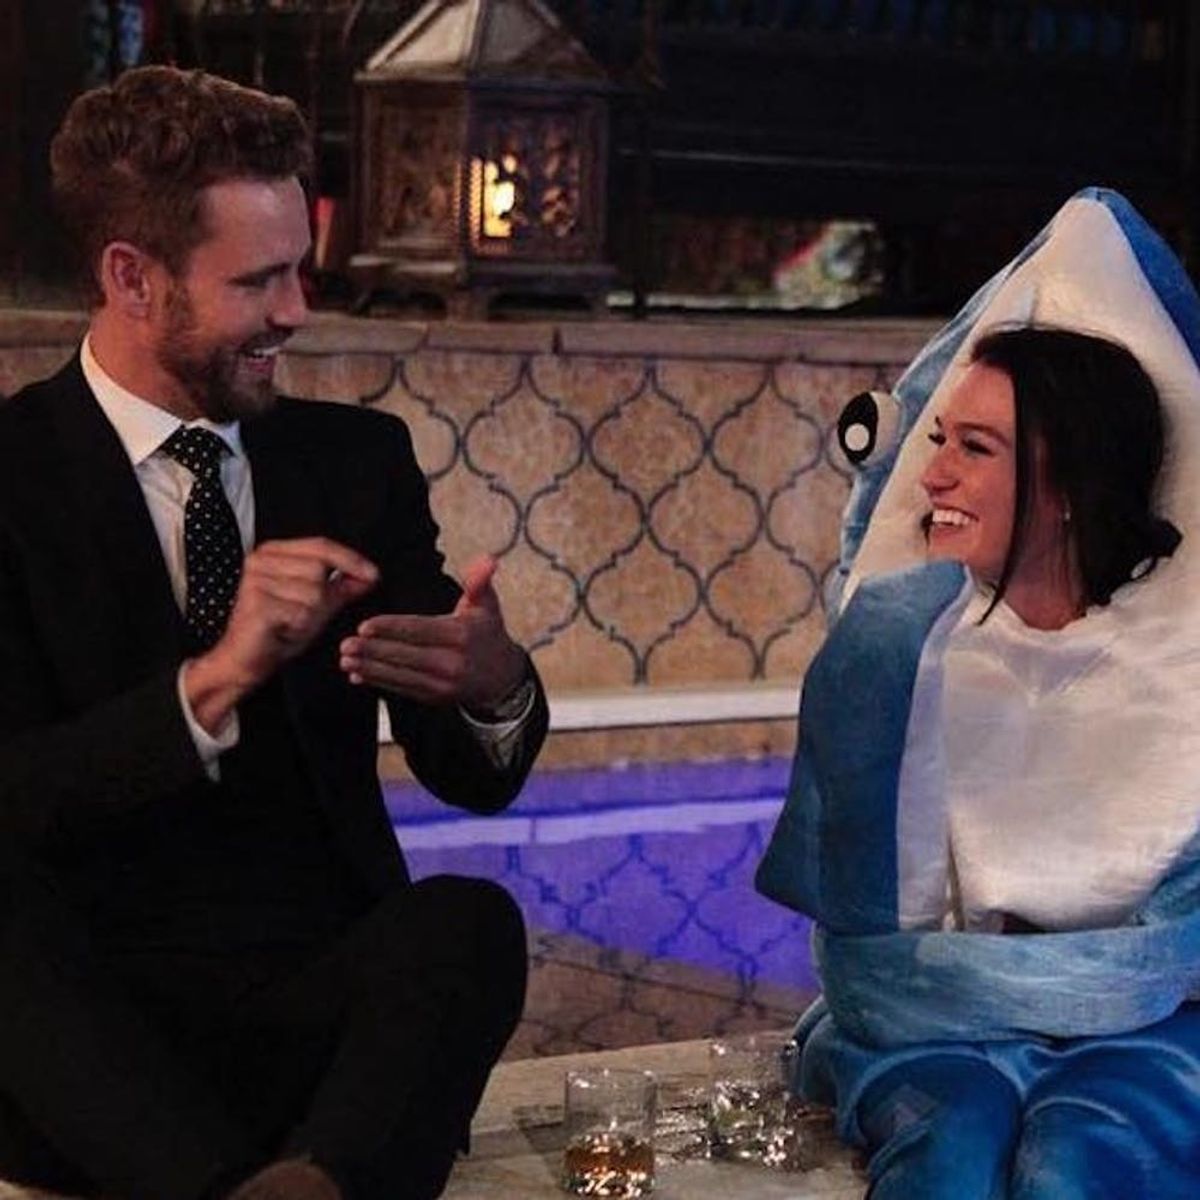 Morning Buzz! One of the Bachelor Contestants Dressed Up As a Shark and People Can’t Even + More